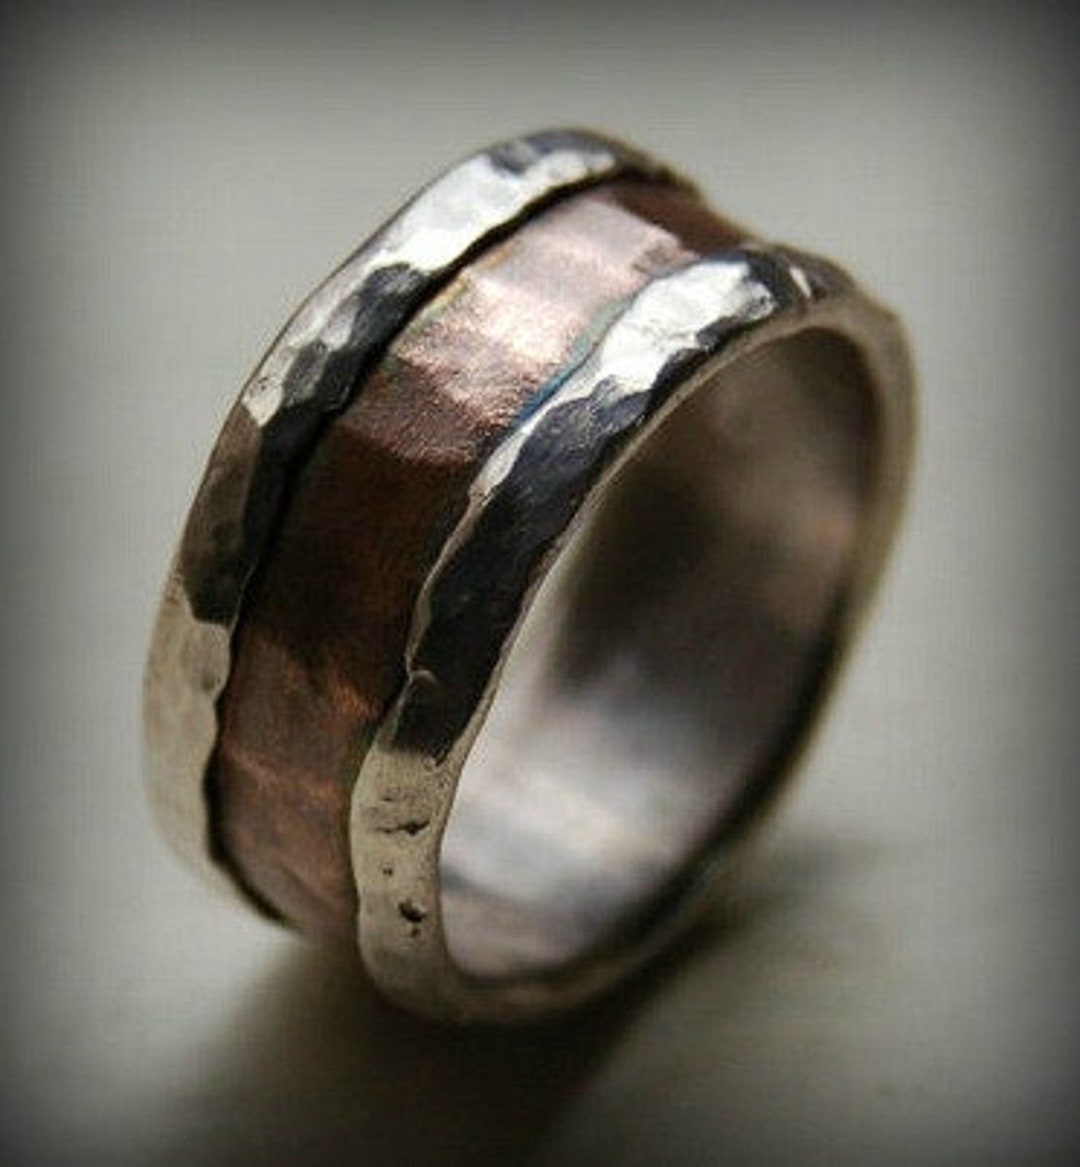 Mens Wedding Band Rustic Fine Silver and Copper Ring Handmade